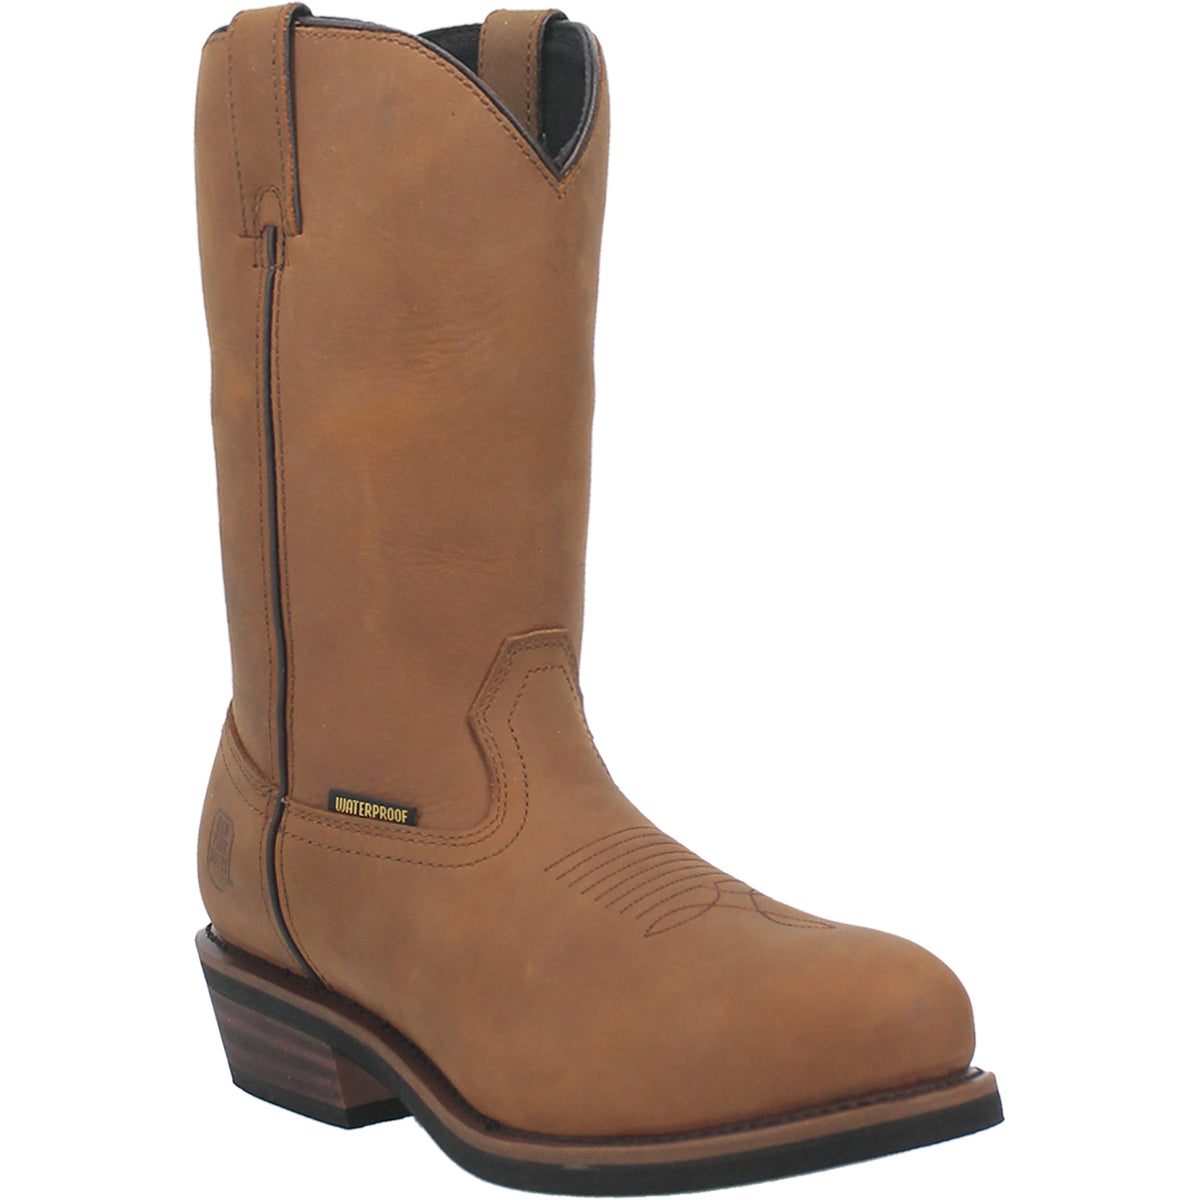 ALBUQUERQUE STEEL TOE WATERPROOF LEATHER BOOT Cover